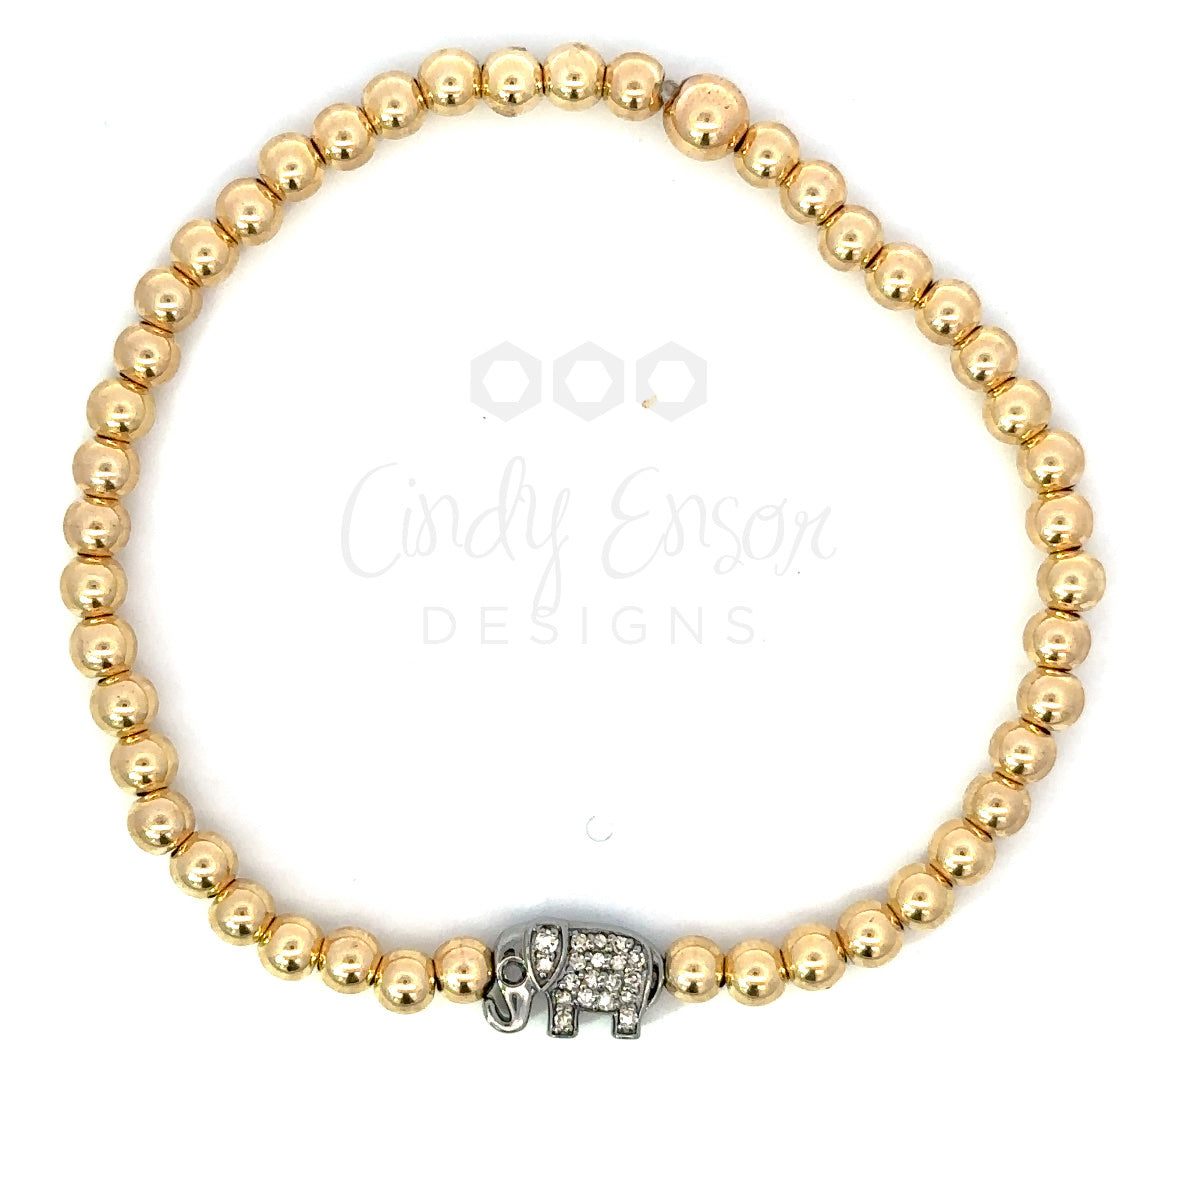 3mm Yellow Gold Filled Bead Bracelet with Sterling Pave Elephant